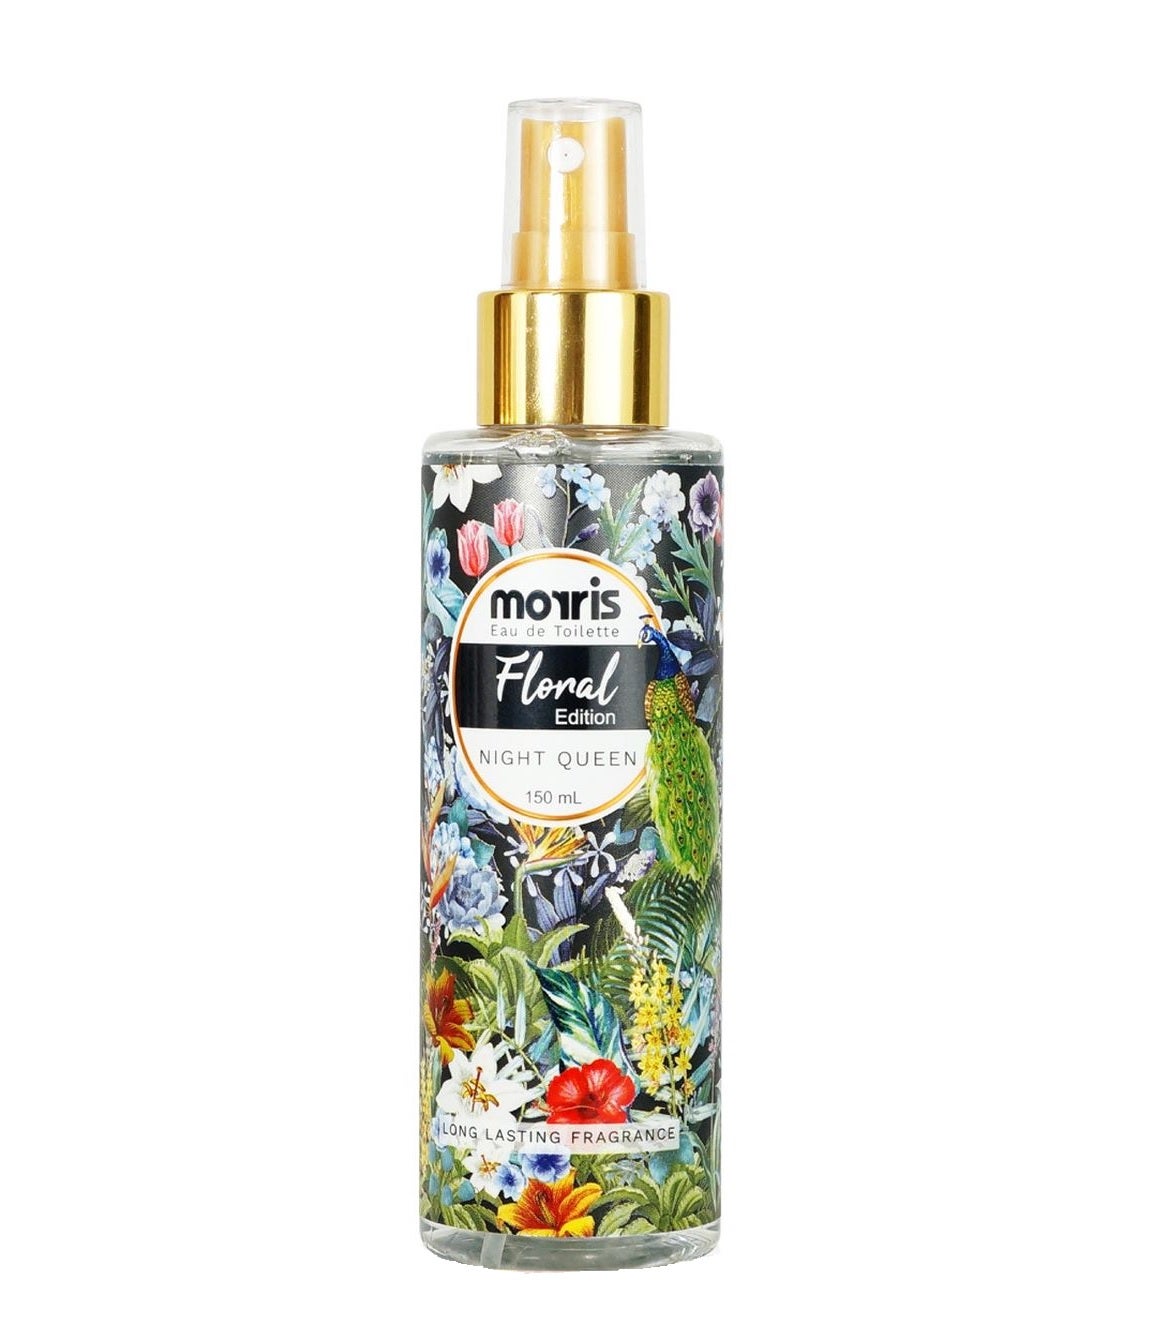 Morris Night Queen Floral Edition Women's Perfume